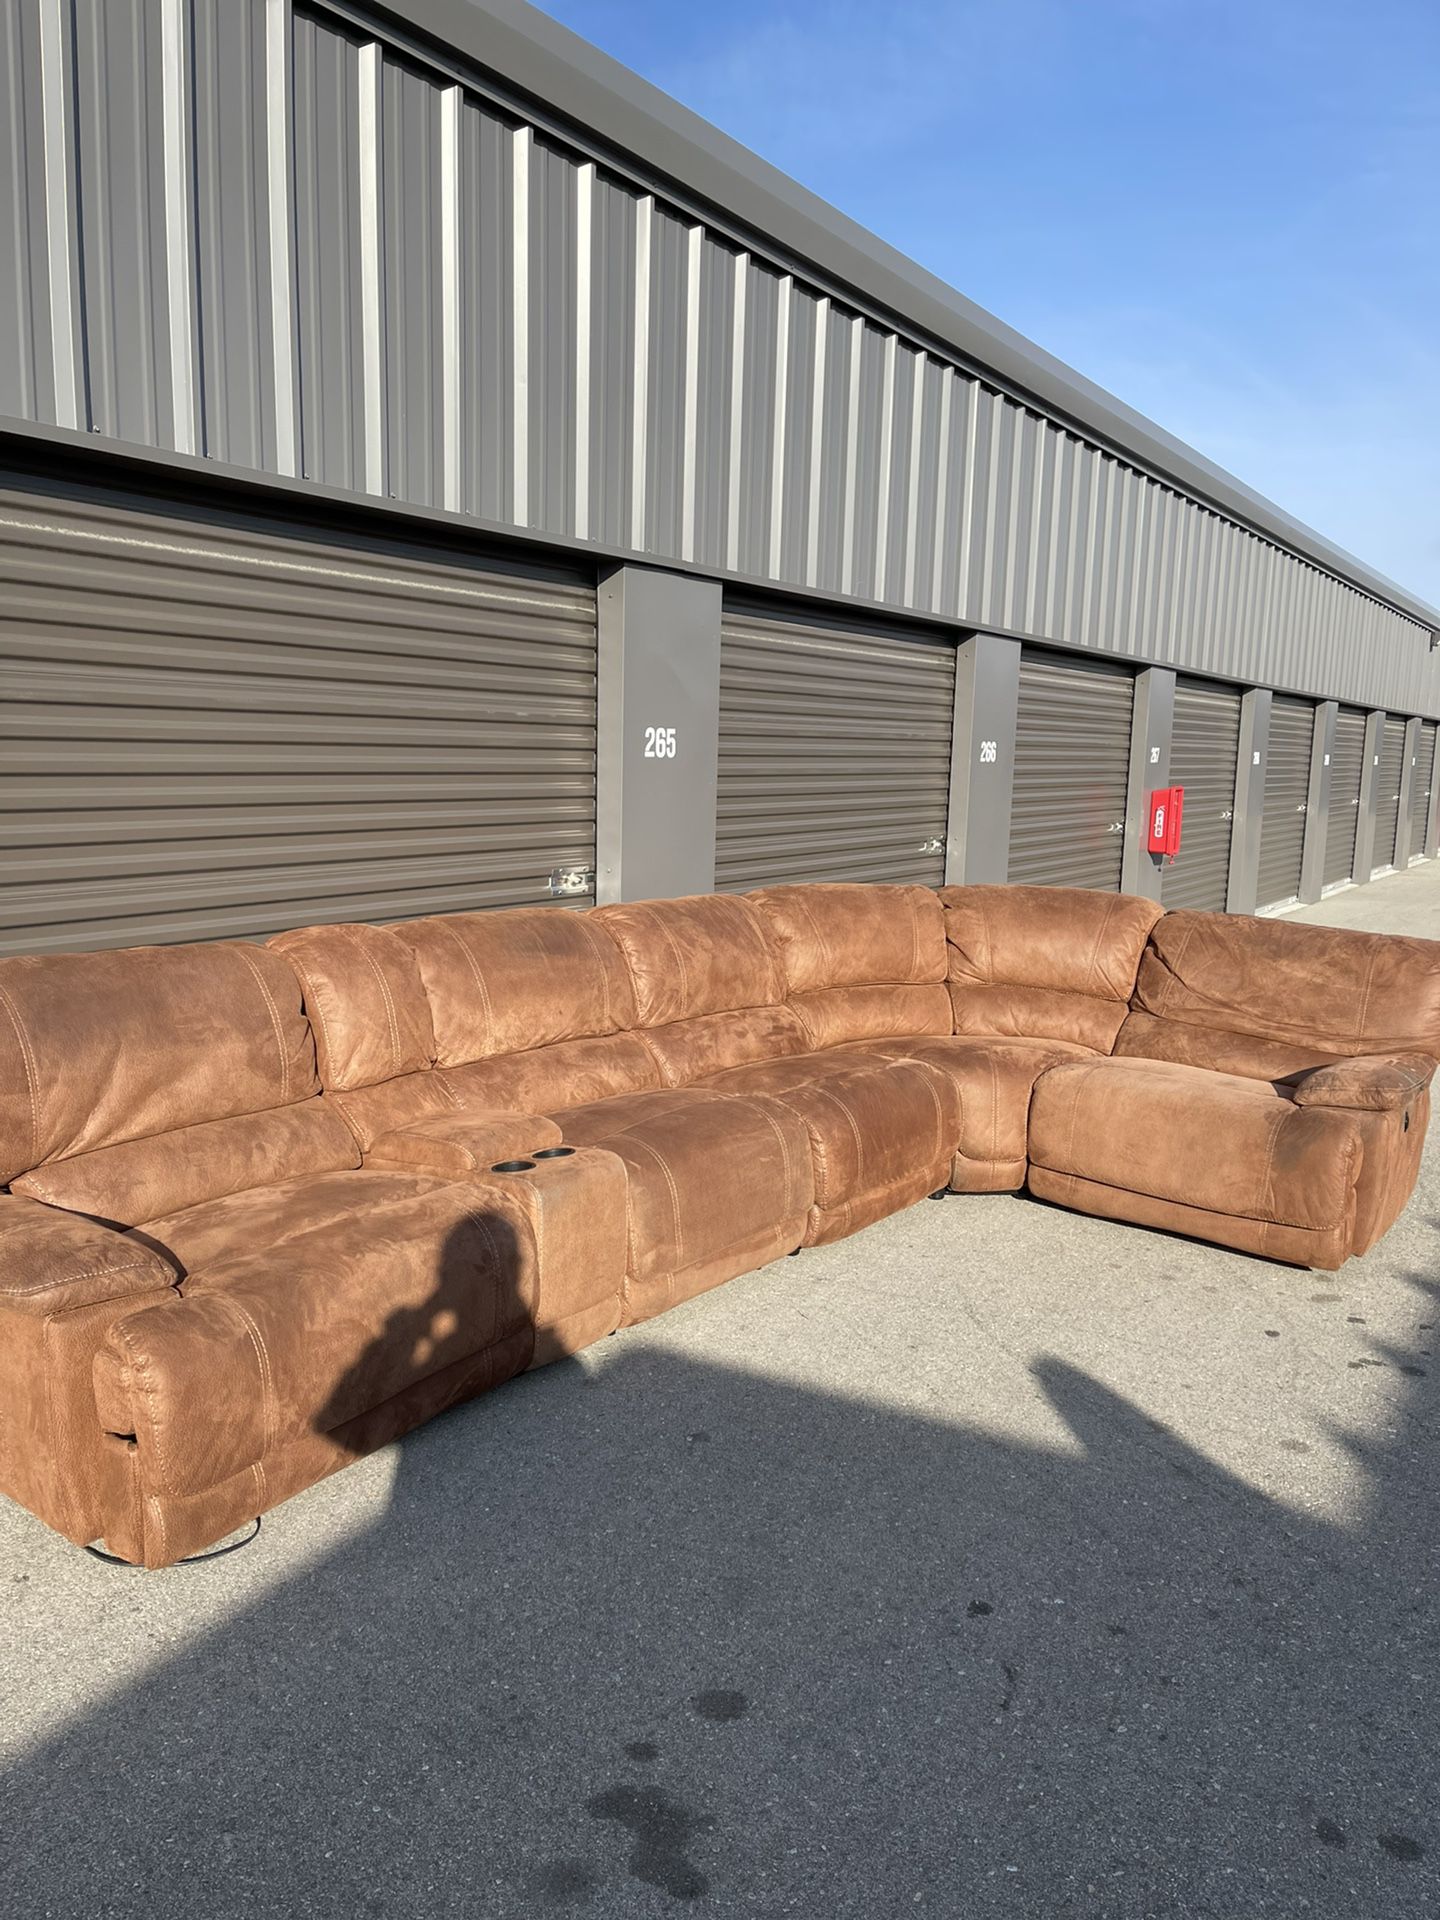 Electric Reclining Sectional - Free Delivery